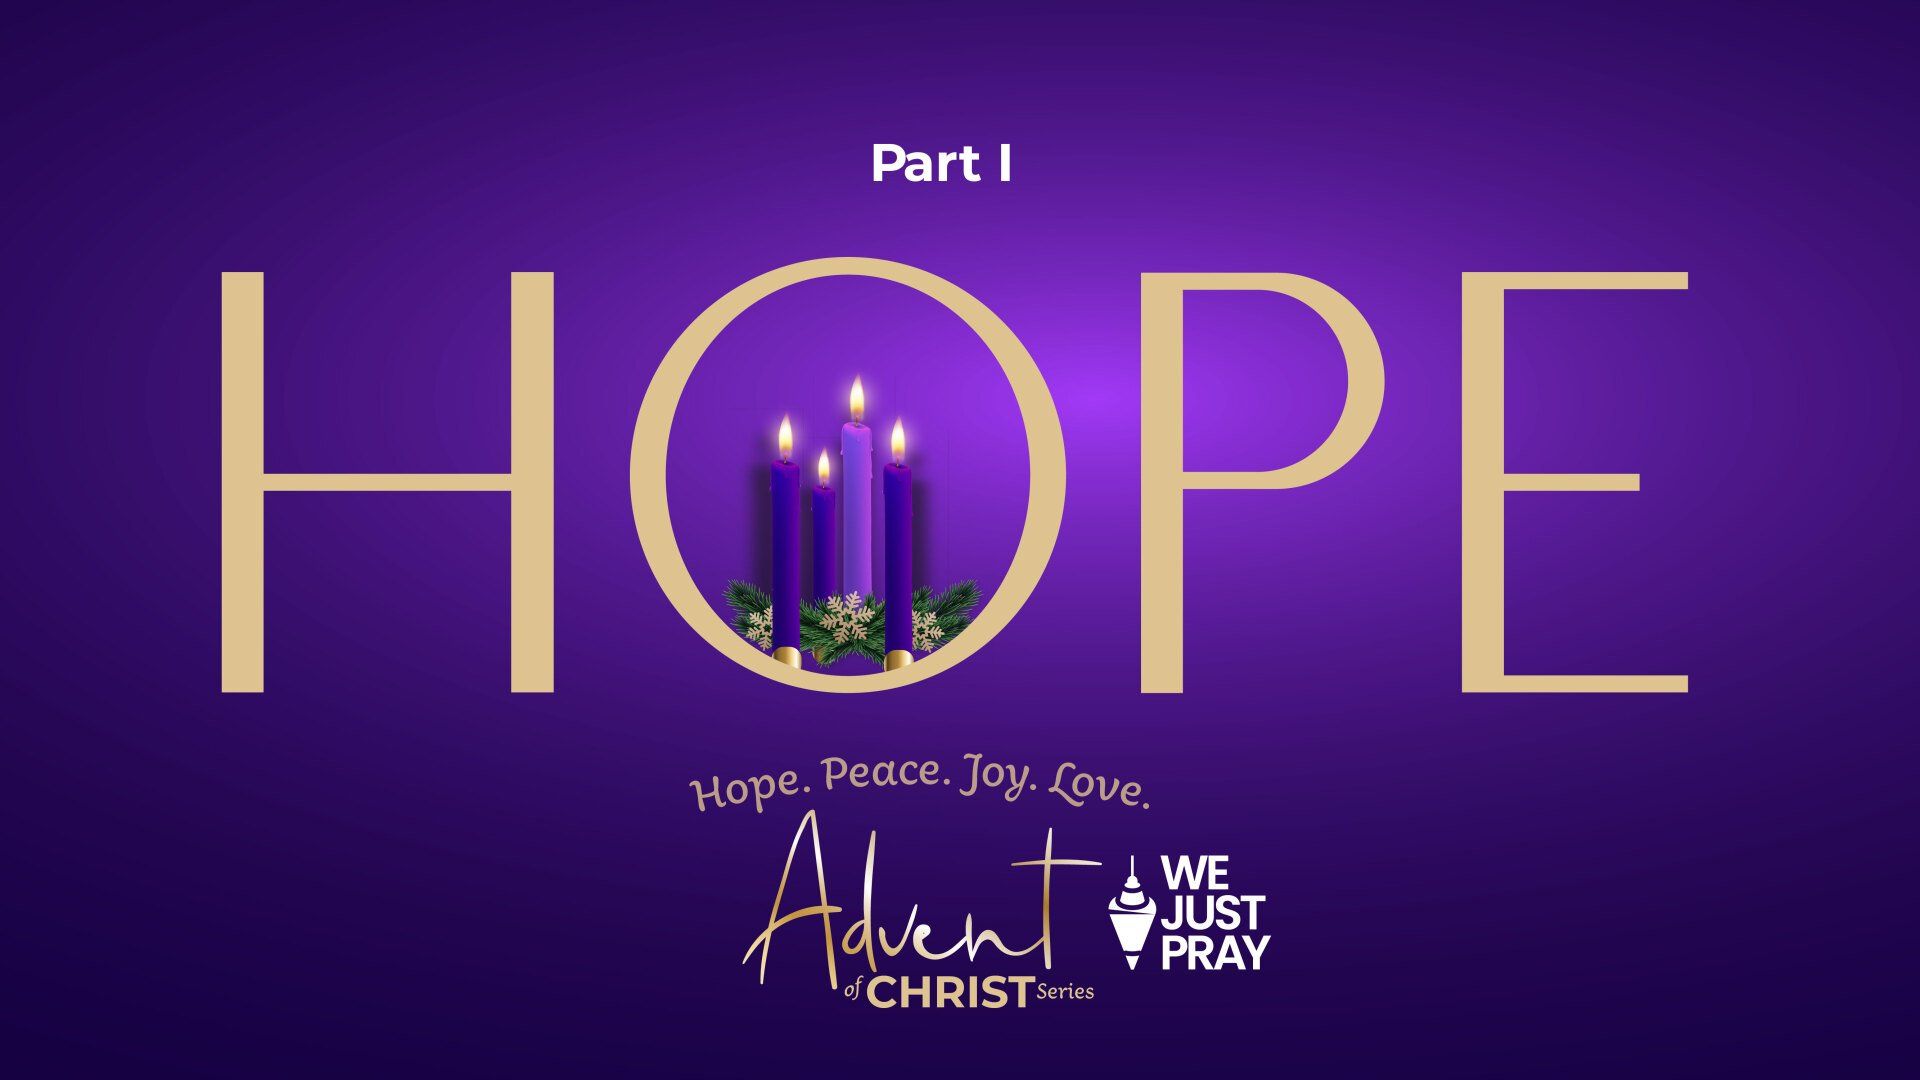 We Just Pray Advent of Christ Series Part 1: Hope with purple background and advent candles